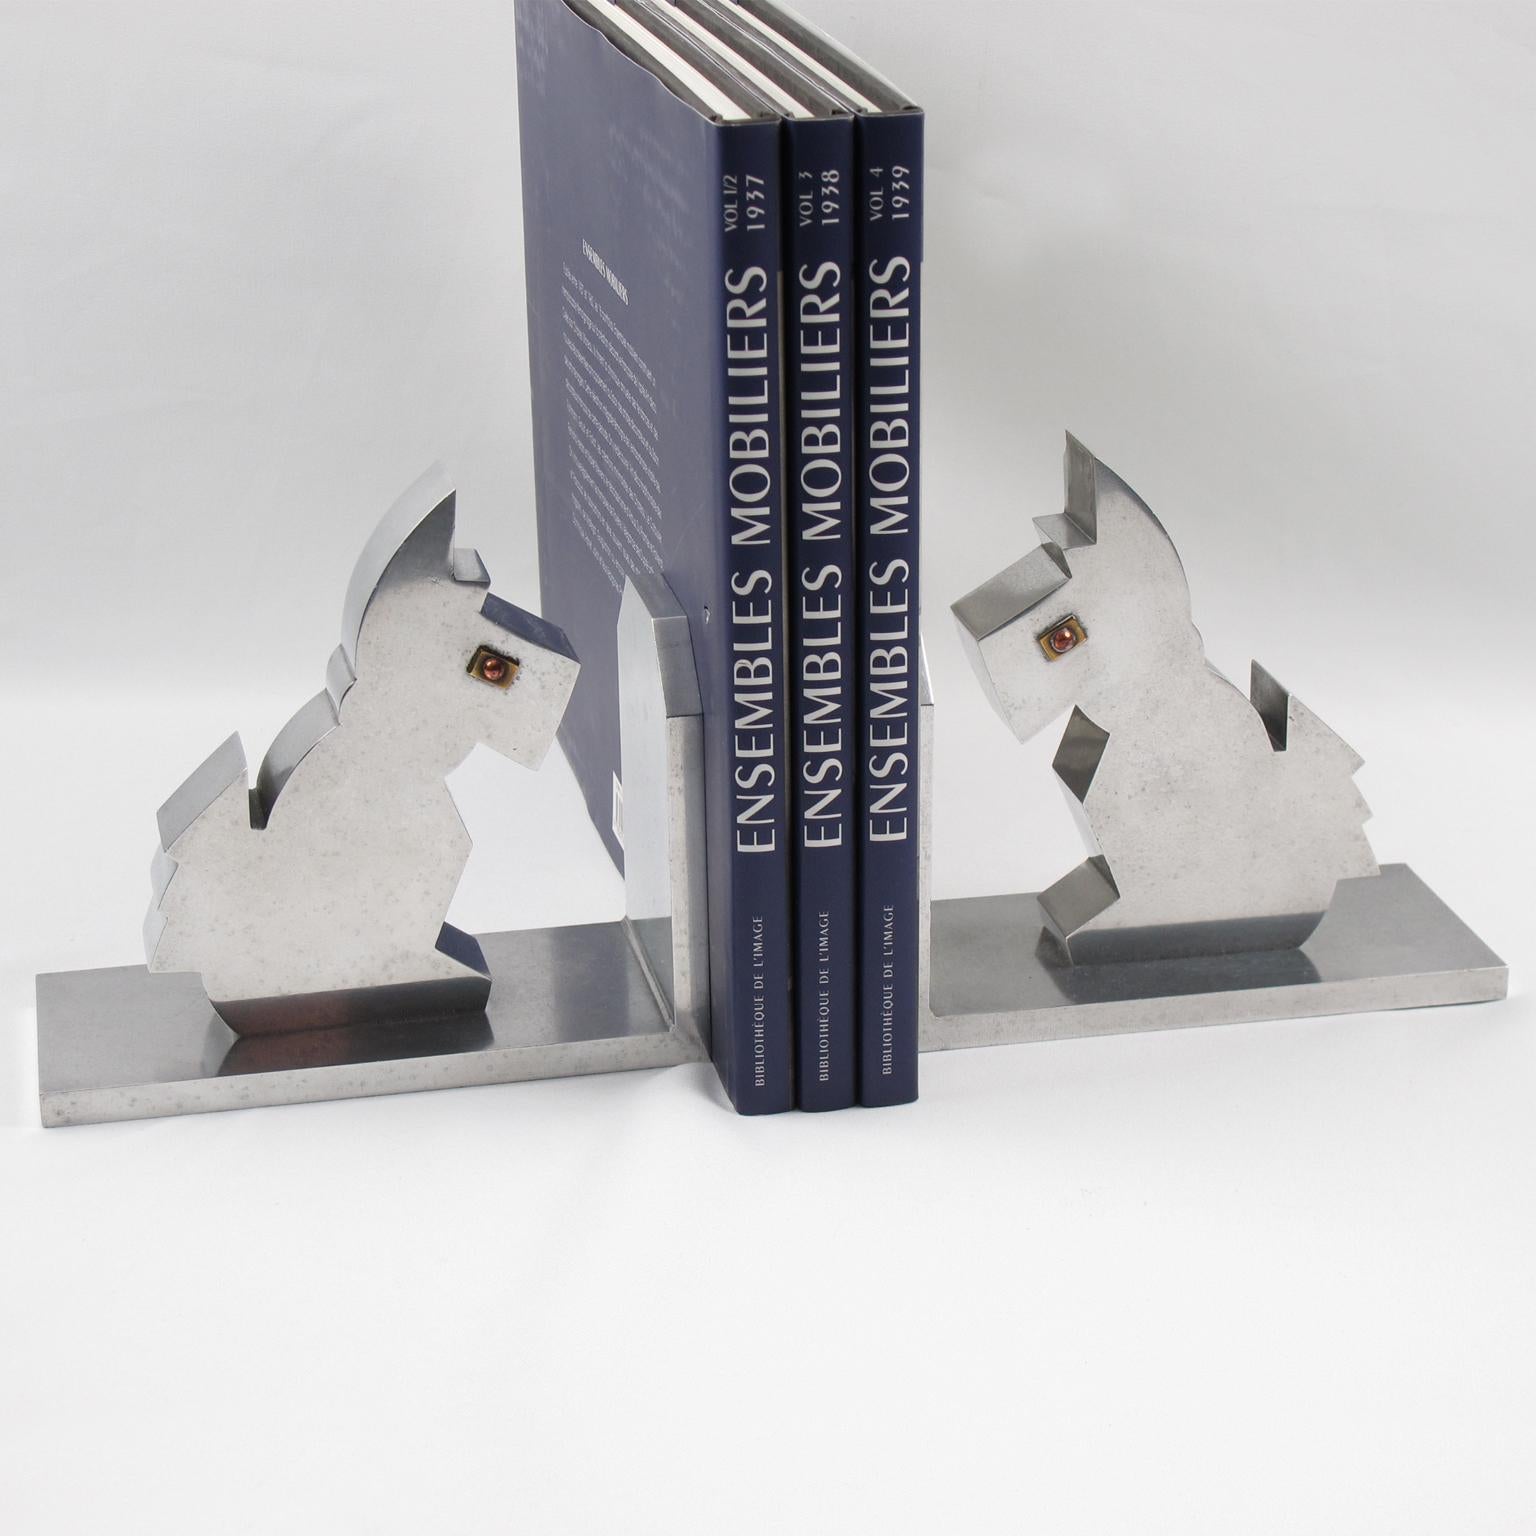 Lovely pair of French Art Deco cast aluminum bookends. Featuring cute metal Scottie dogs with brass and copper eyes. Great geometric modernist cubist shape. Heavy and definitively usable as real bookends. No visible maker's mark.
Measurements: 6.32